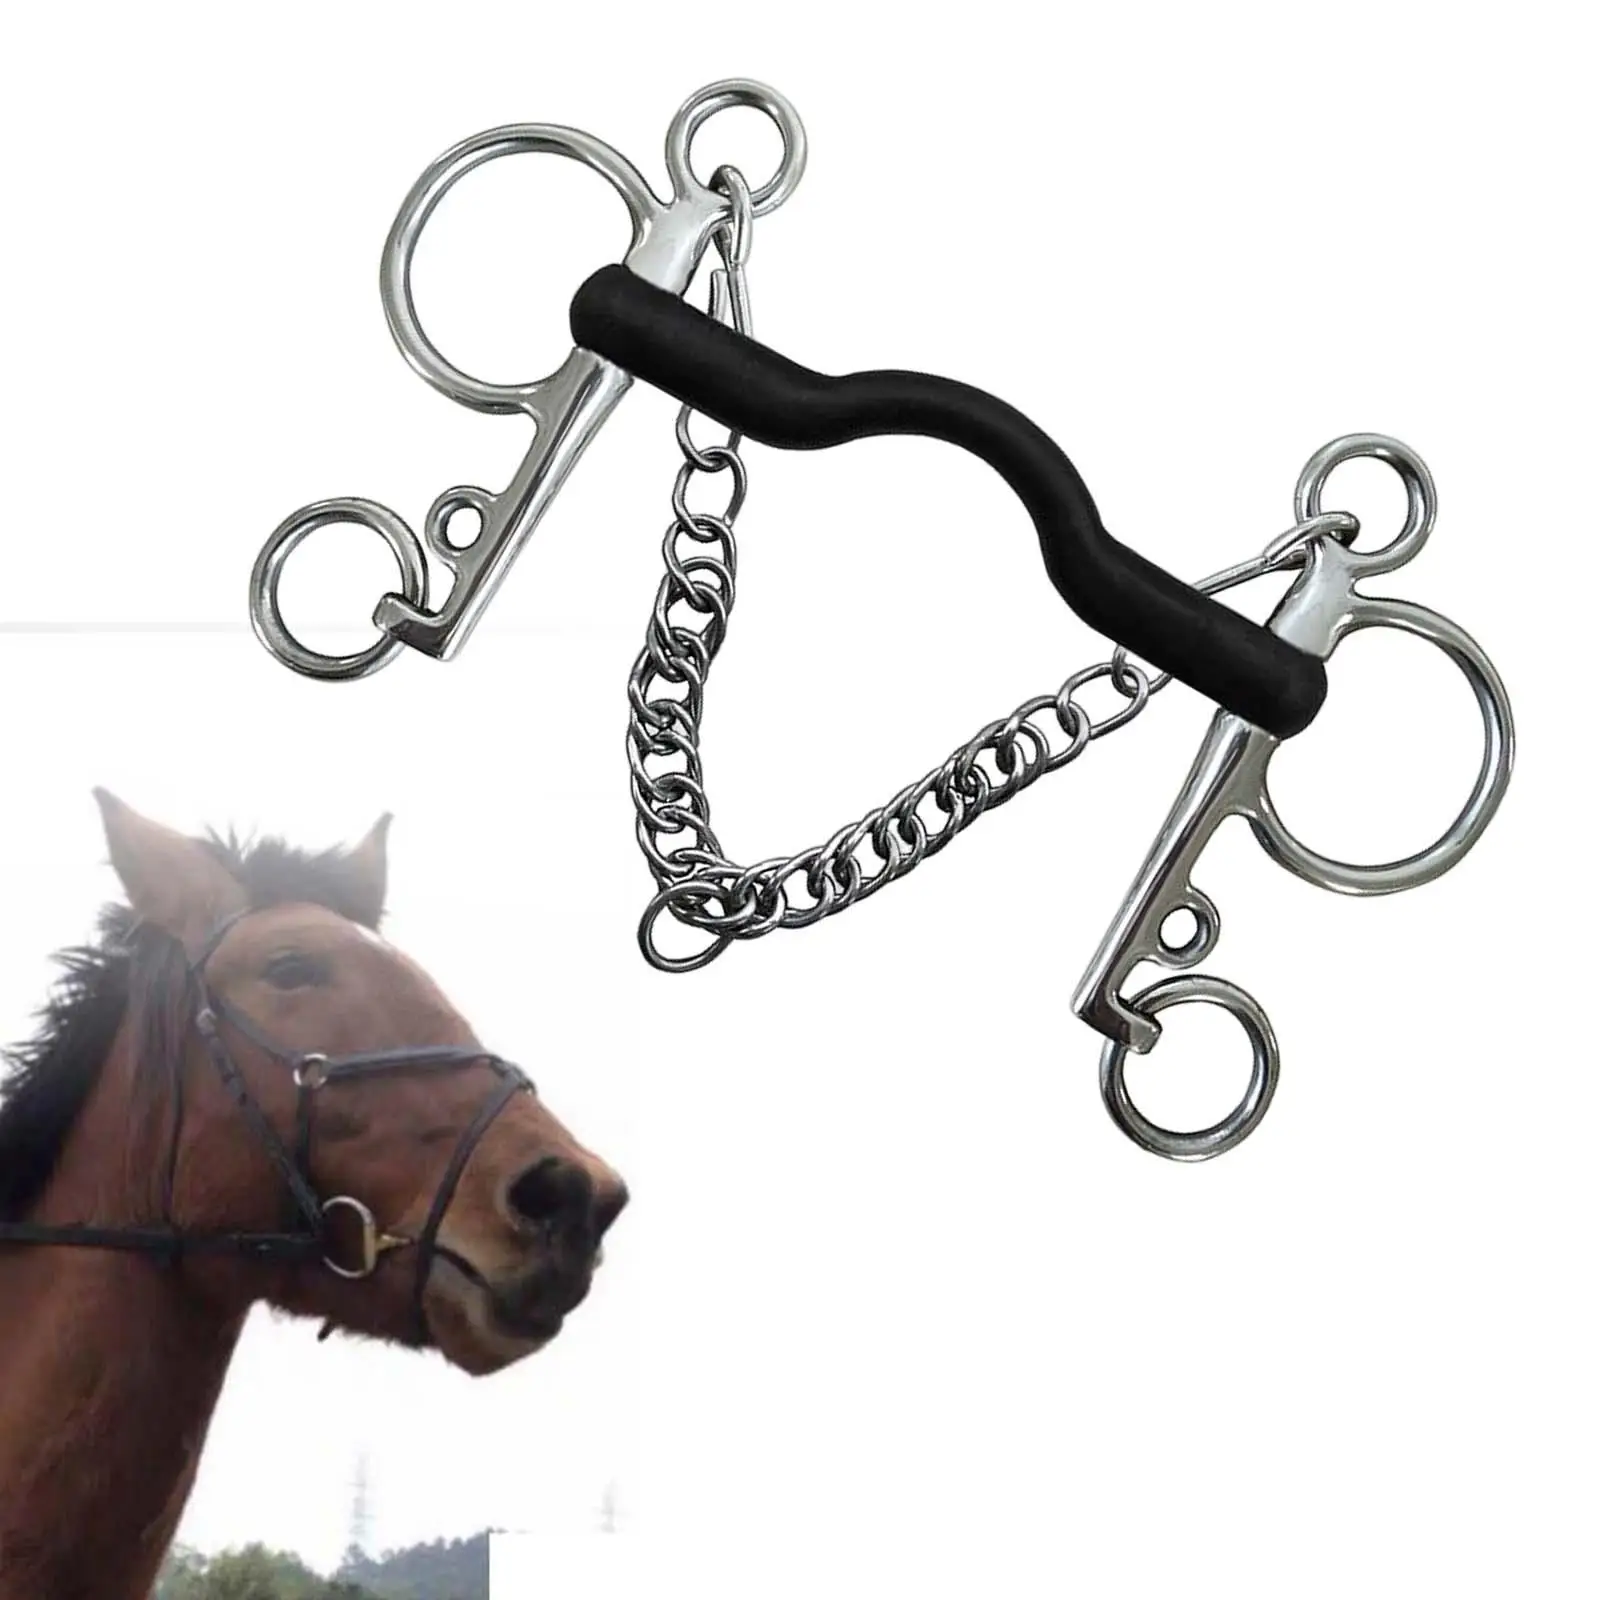 Western Style Horse Bit, Mouth W/Curb Hooks Chain, Stainless Steel with Silver